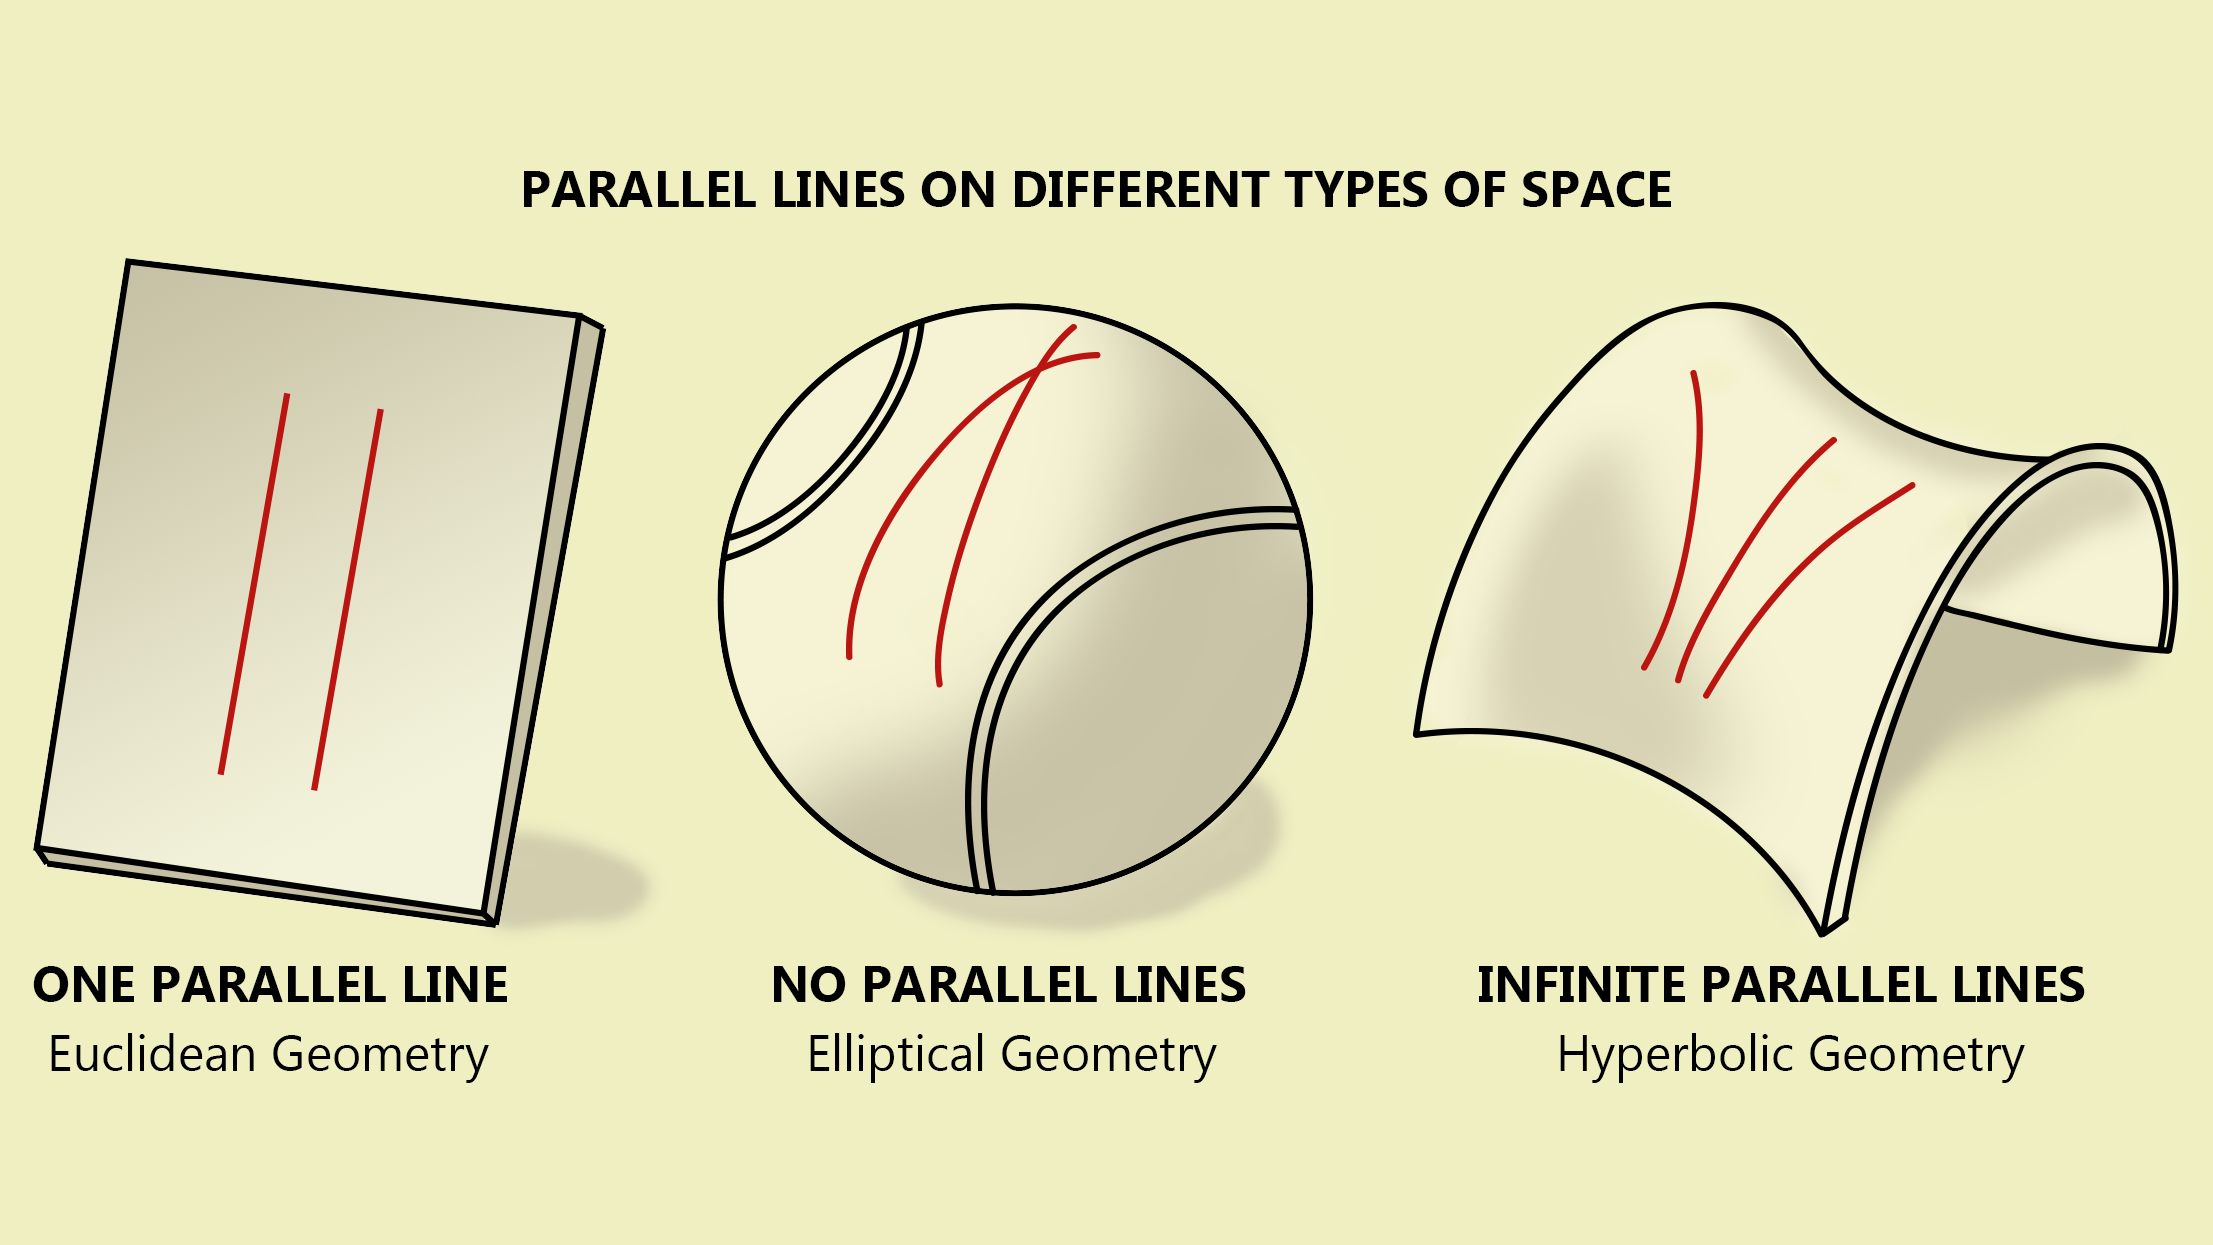 Parallel lines on different types of space